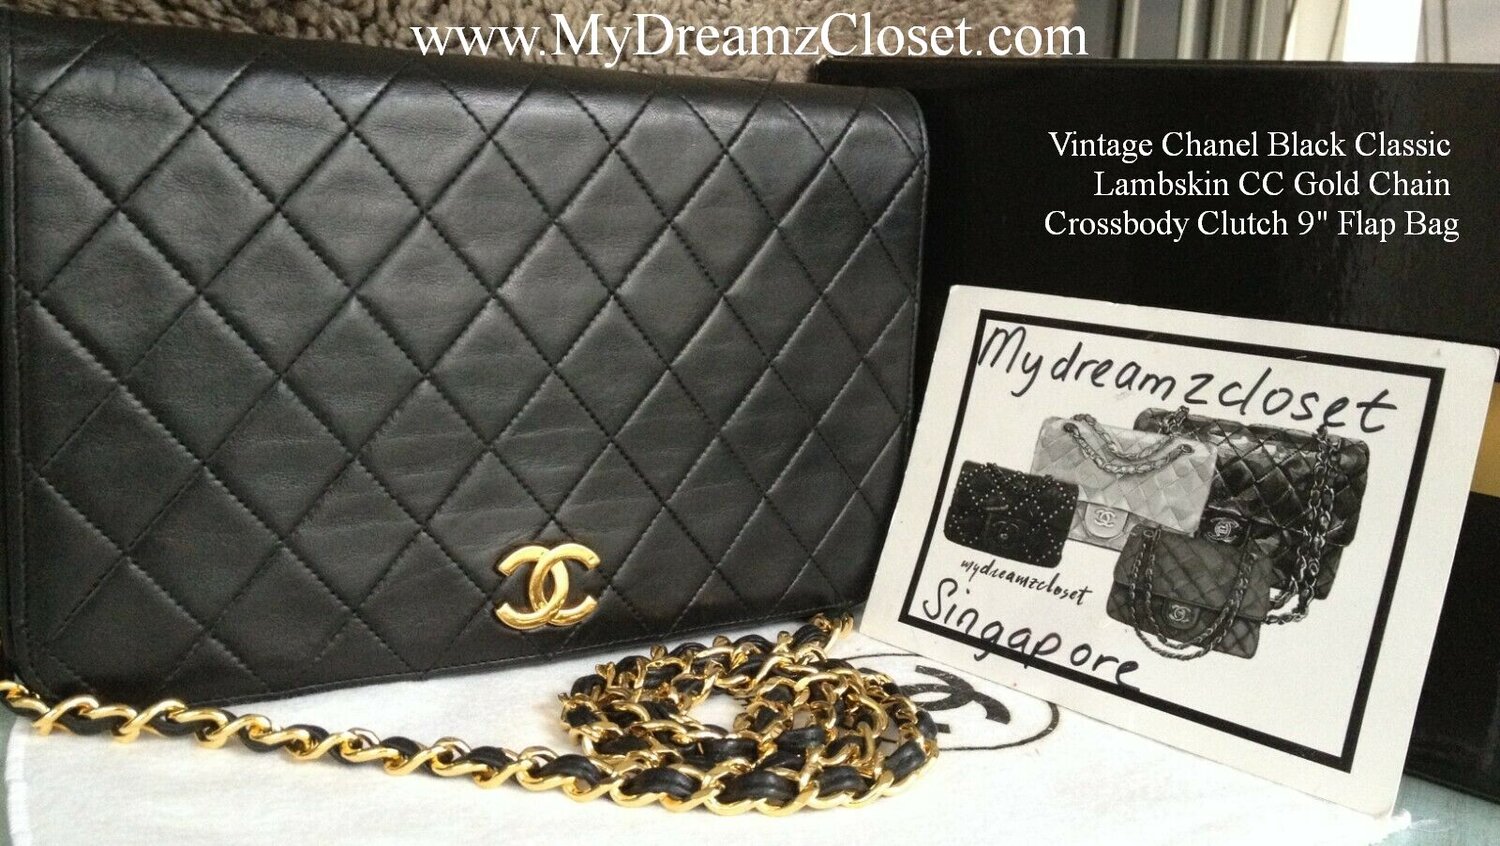 🖤 VINTAGE CHANEL SMALL BLACK JERSEY CLASSIC FLAP BAG CF 2.55